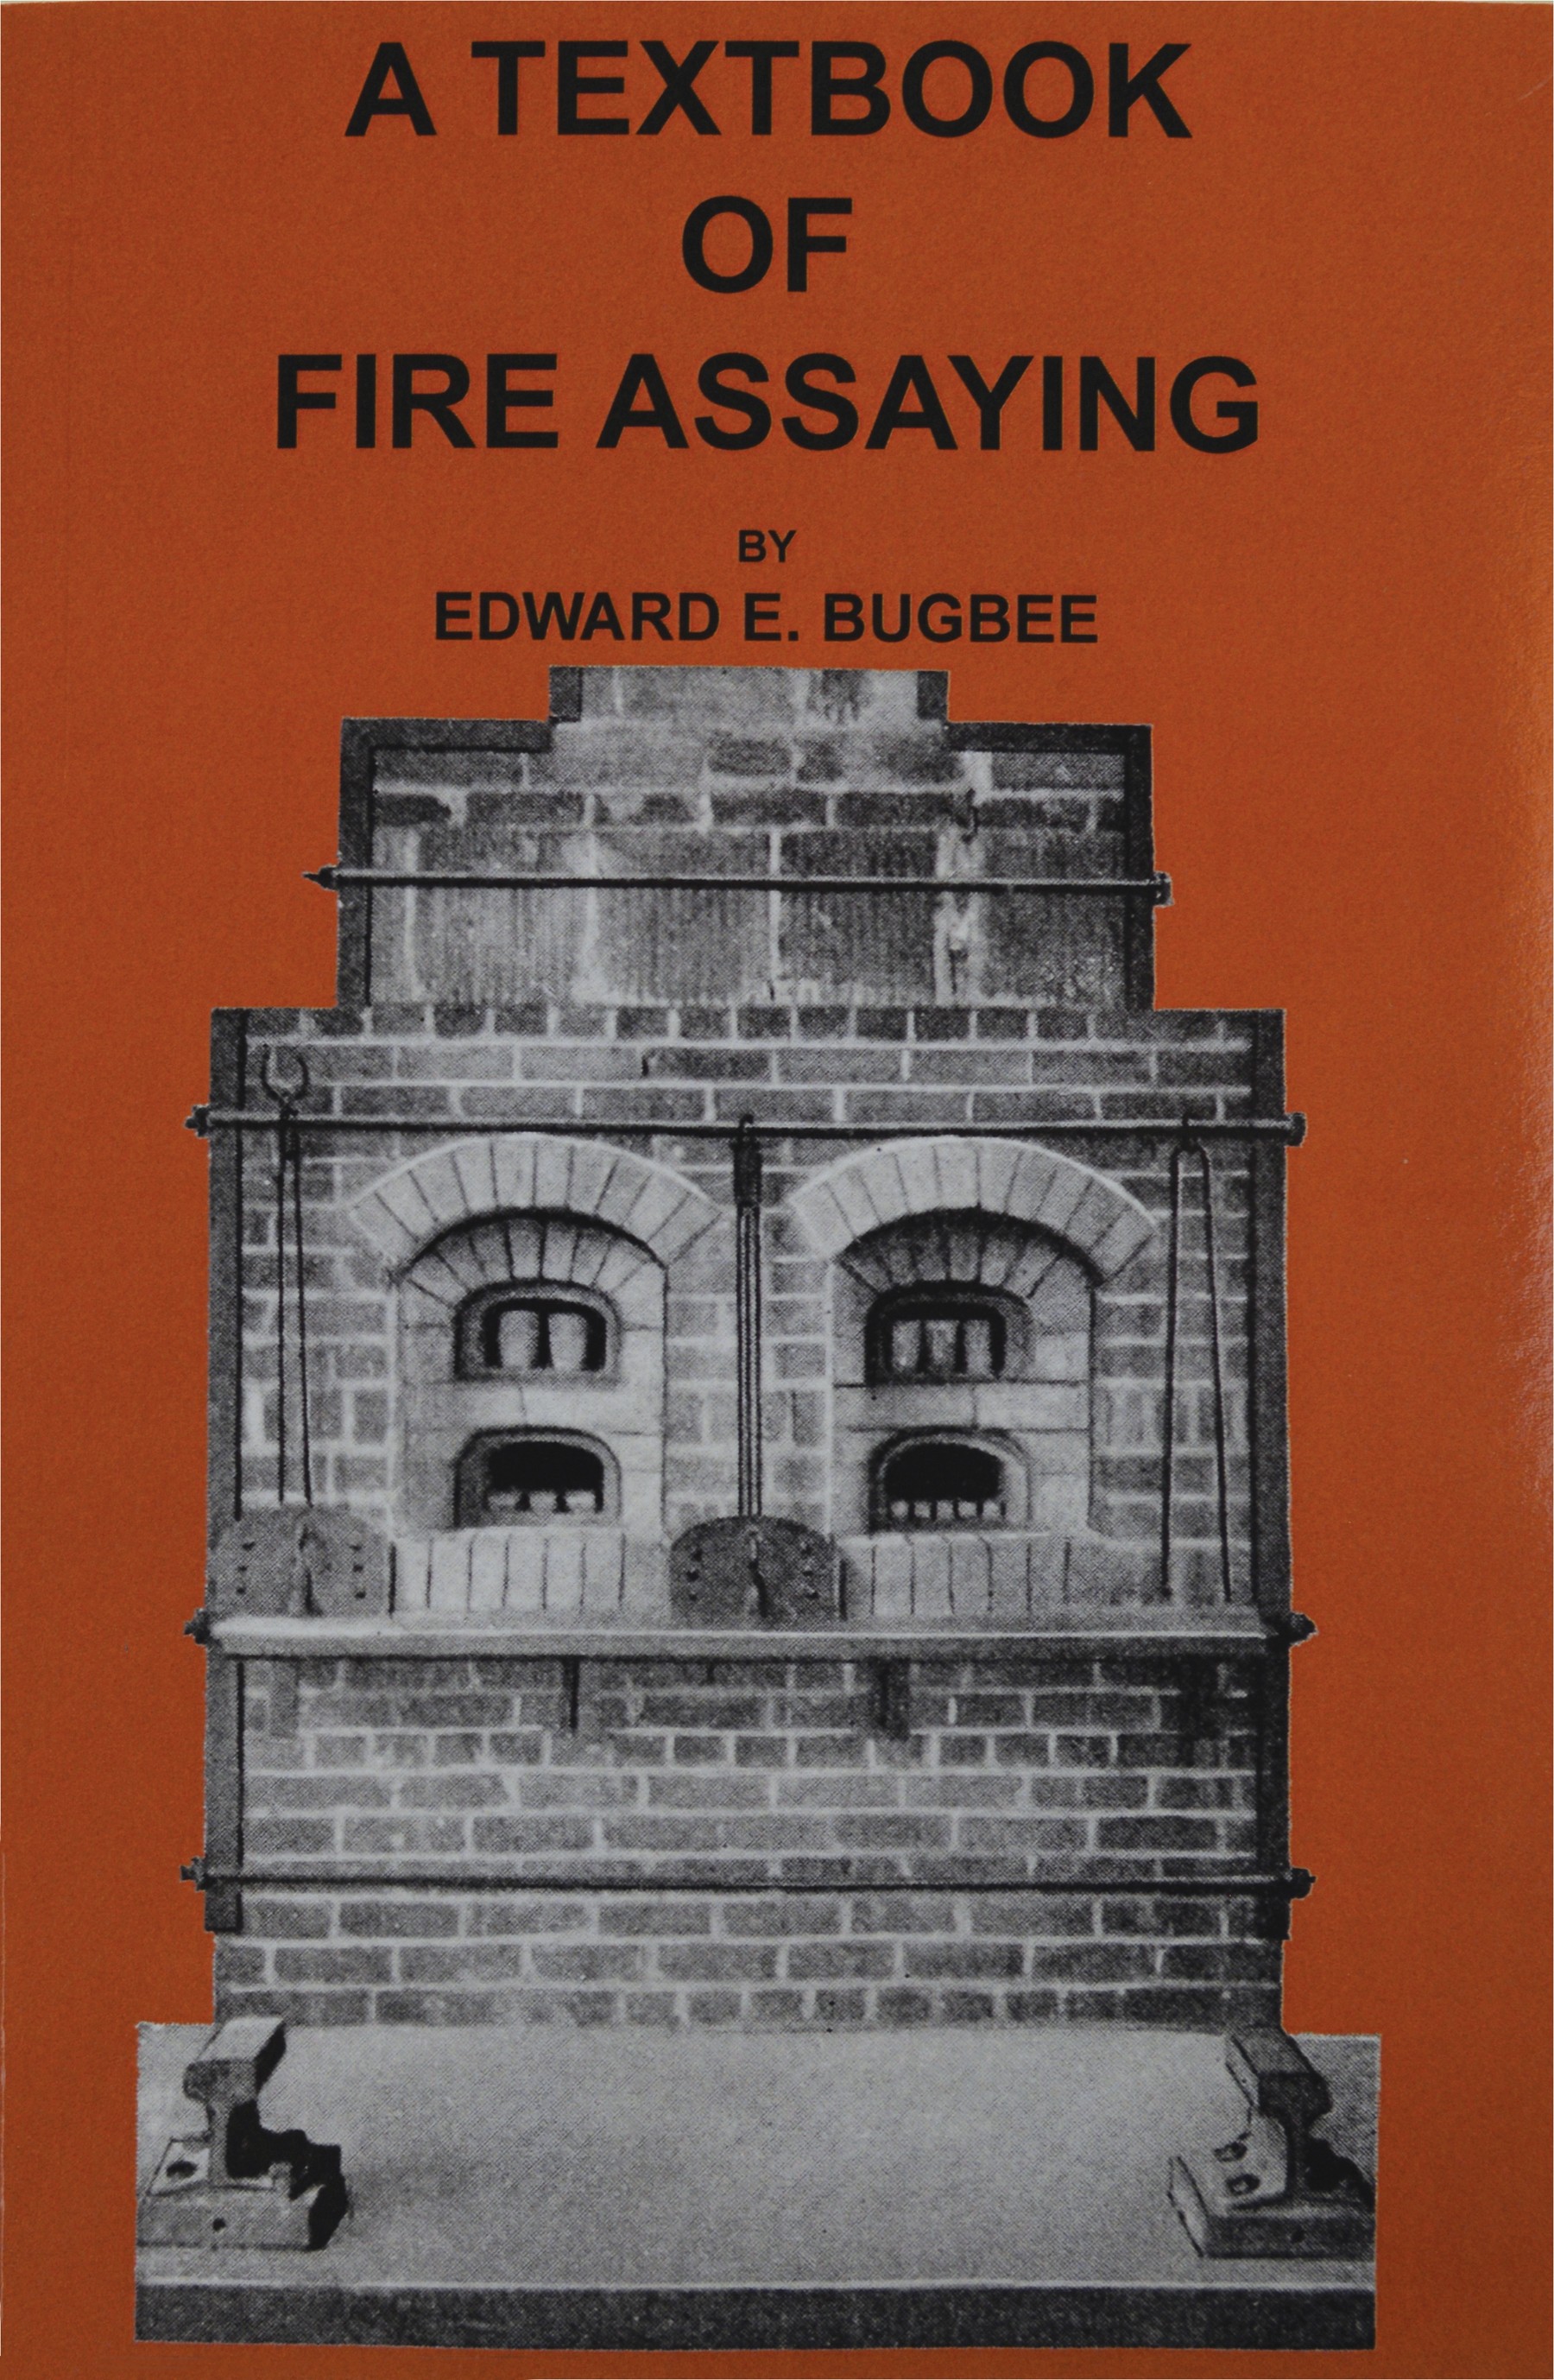 A Textbook on Fire Assaying by Edward Bugbee